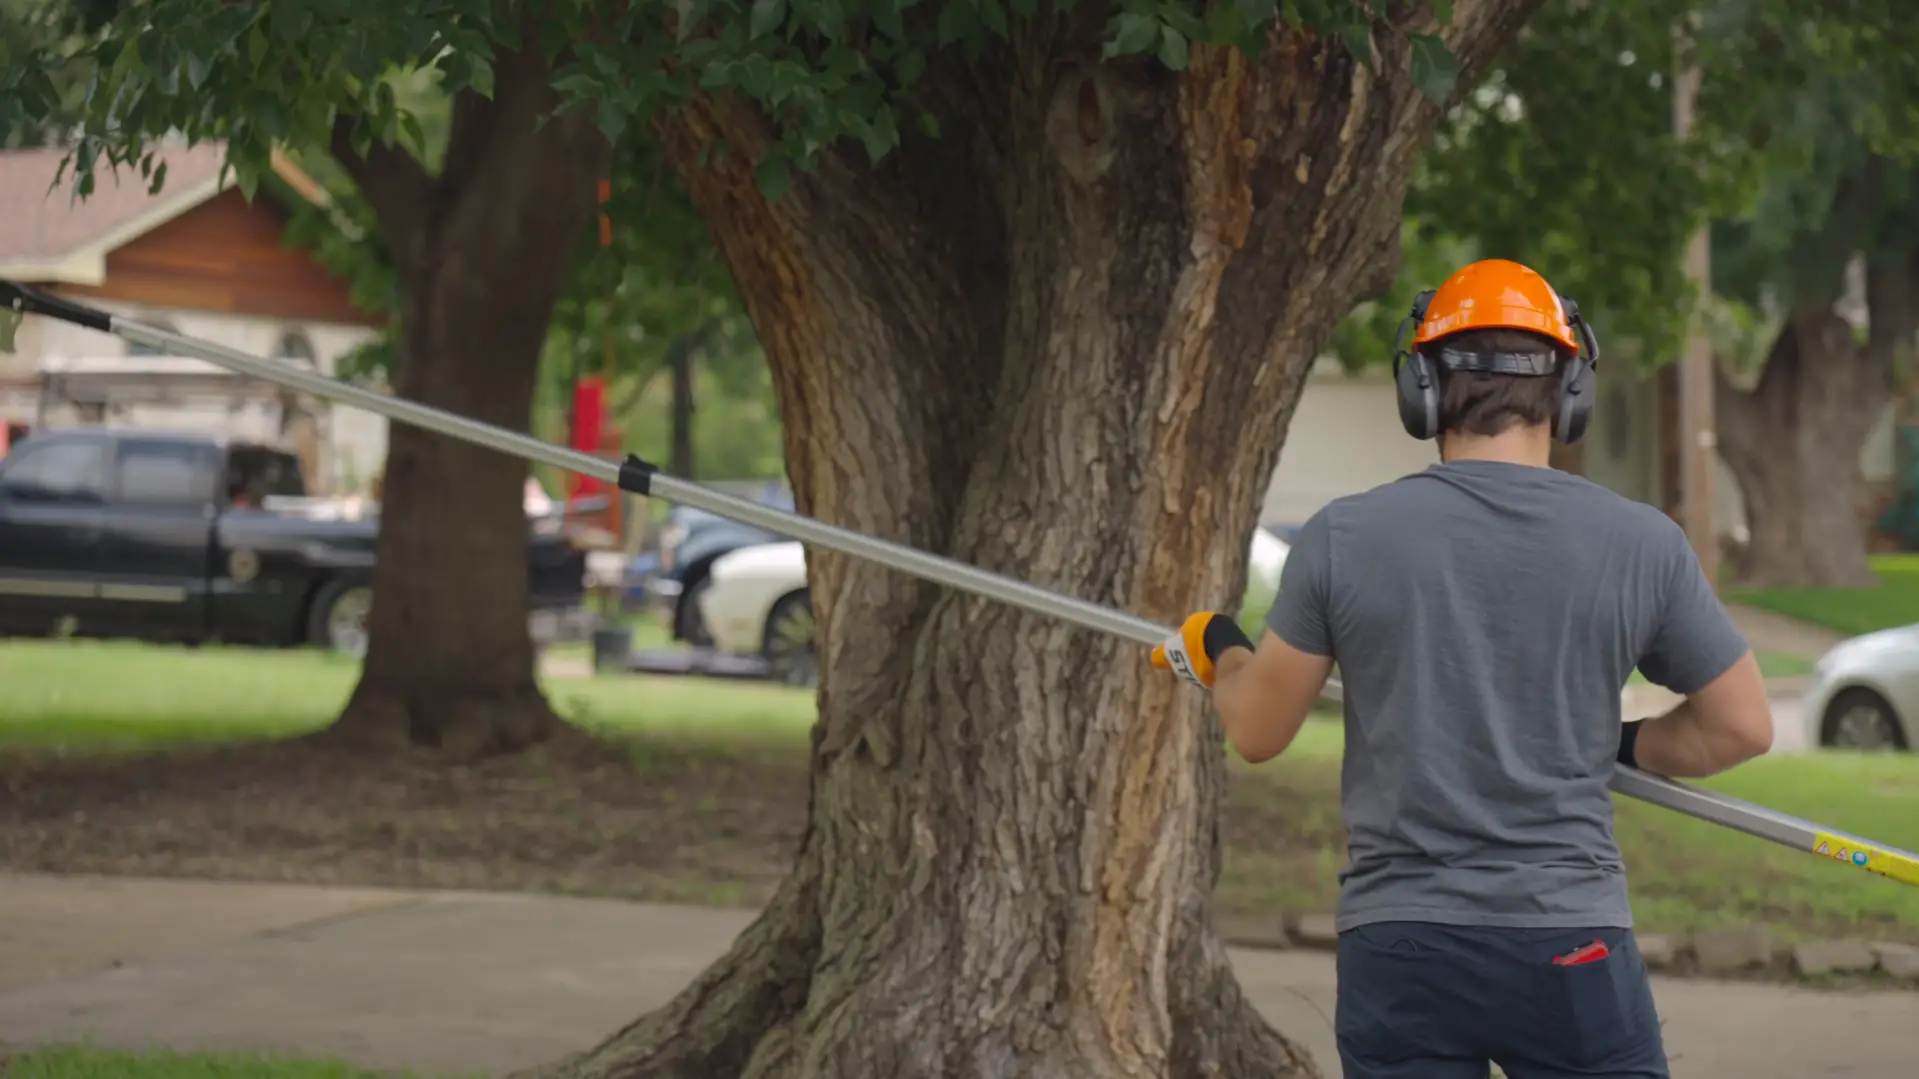 Top 10 Benefits of Renting a Pole Saw